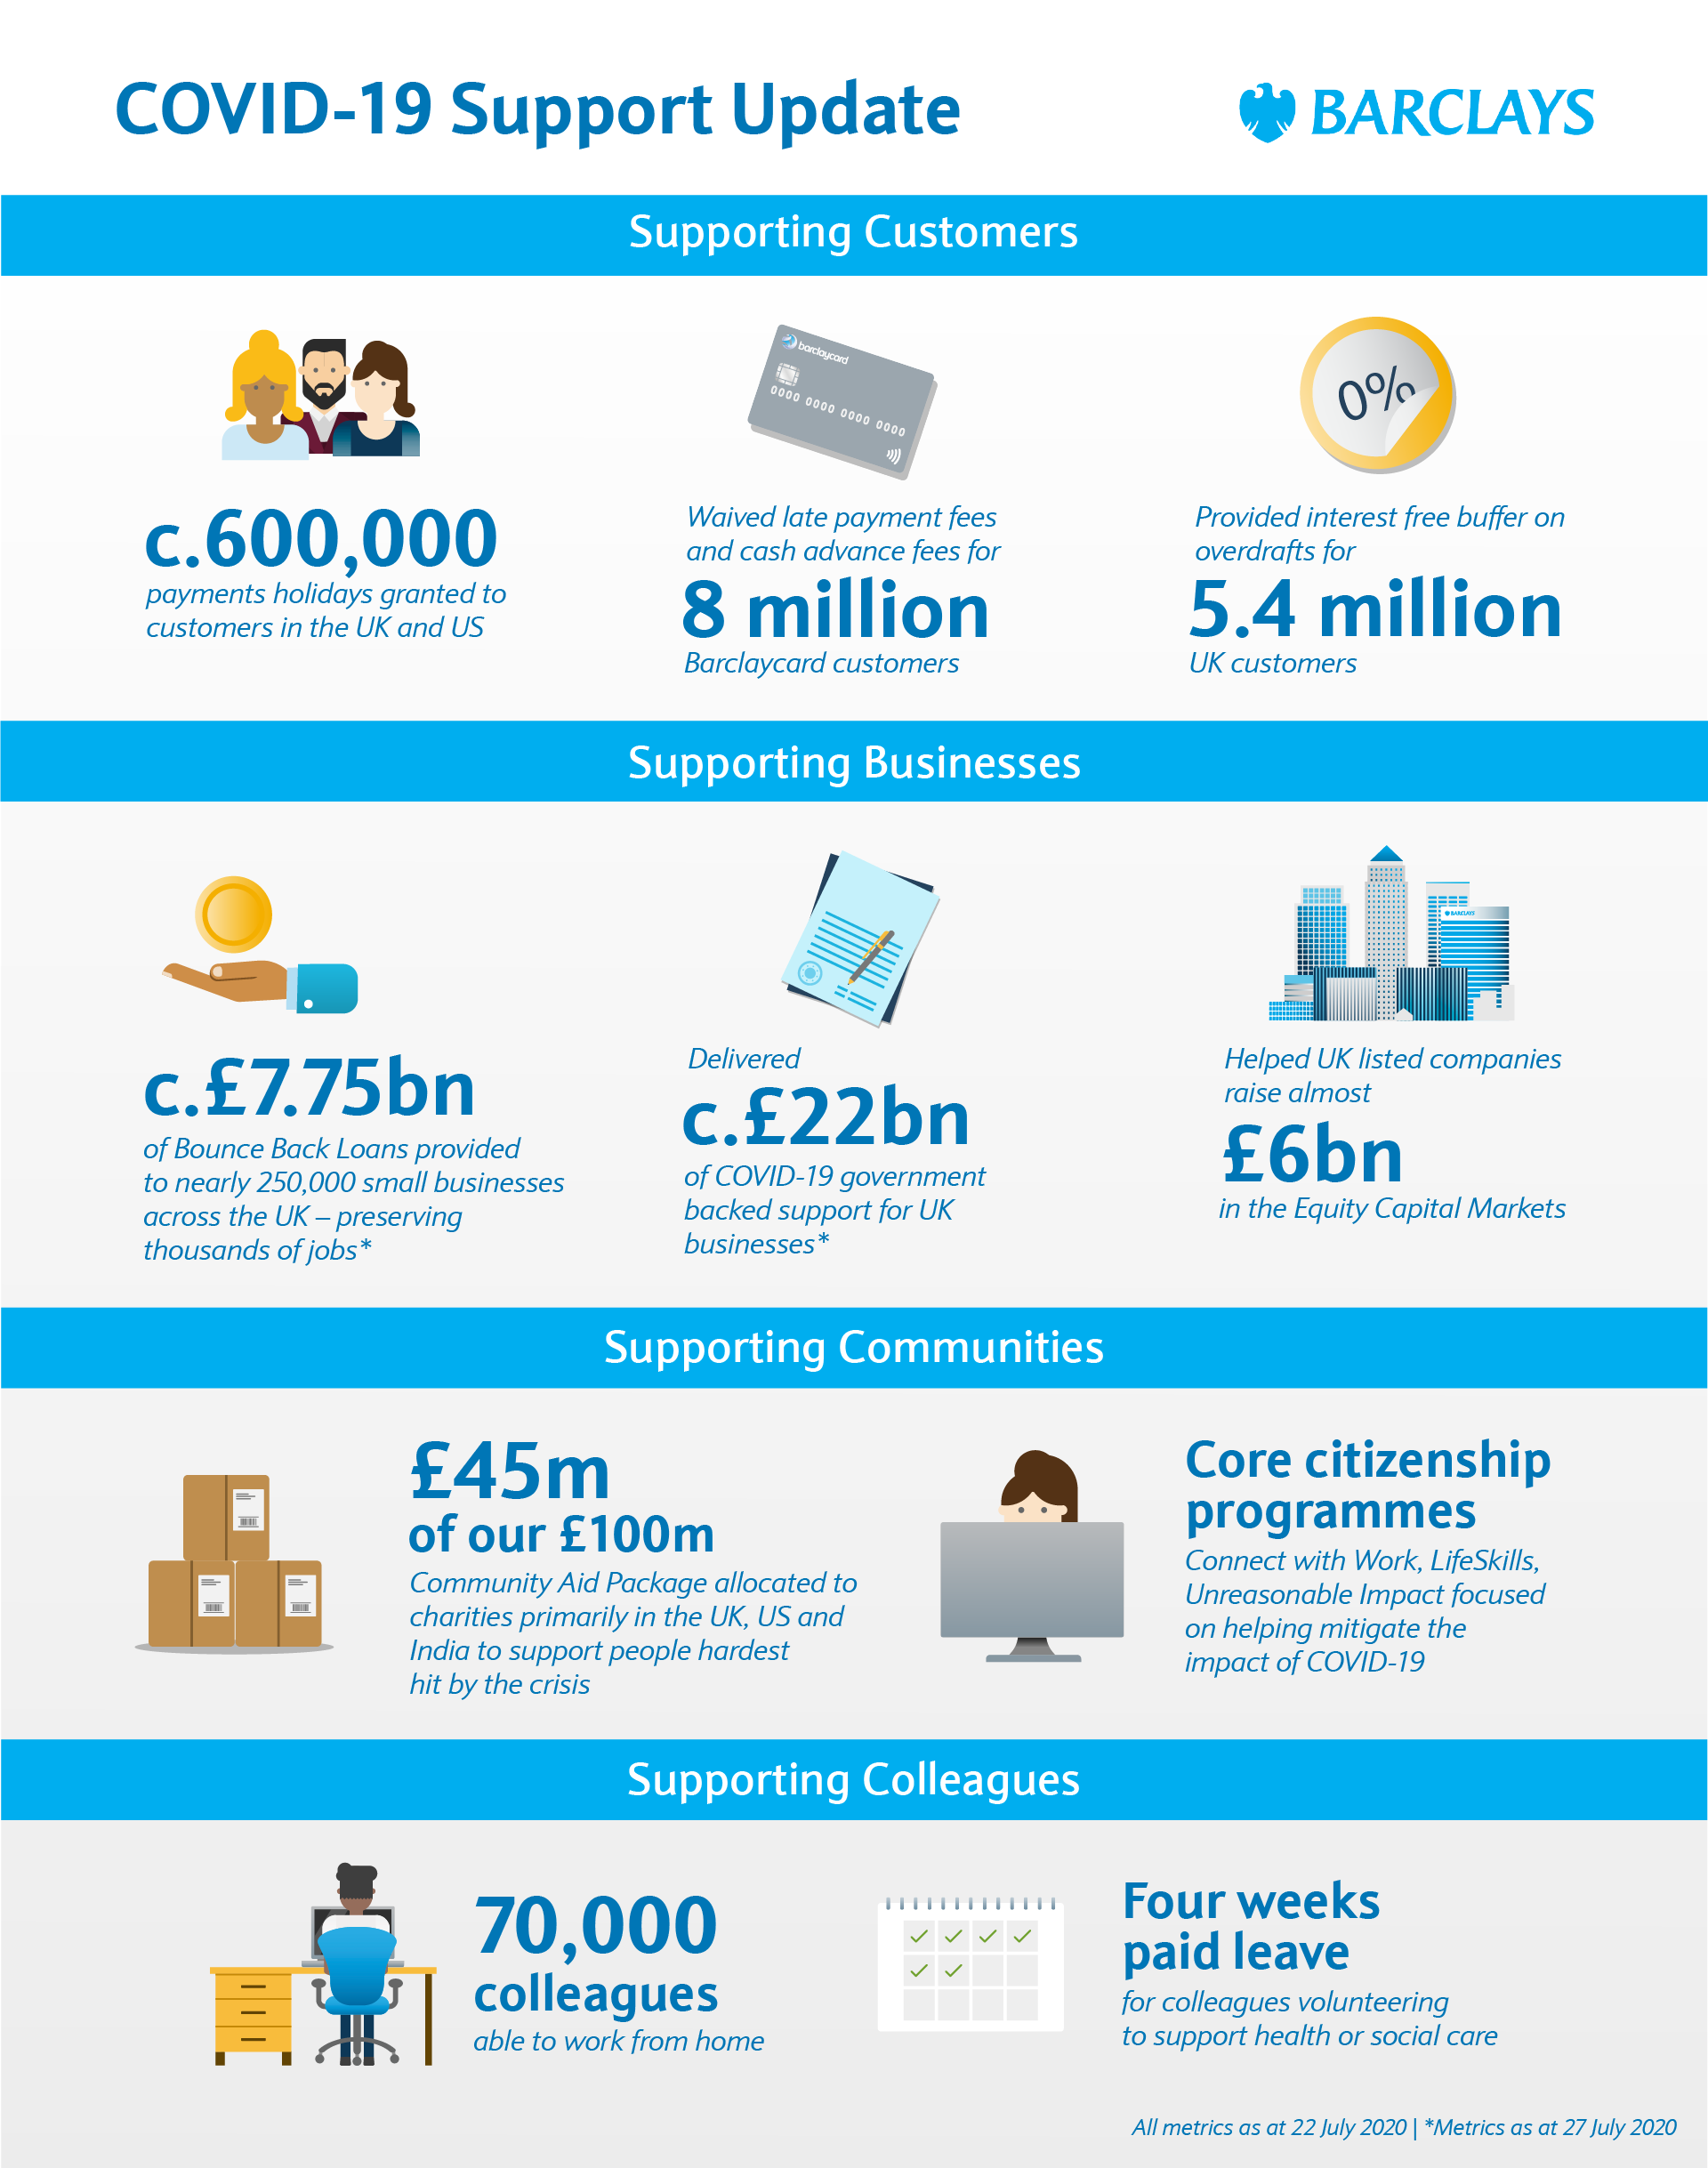 An infographic showcasing Barclays COVID-19 support during H1 2020